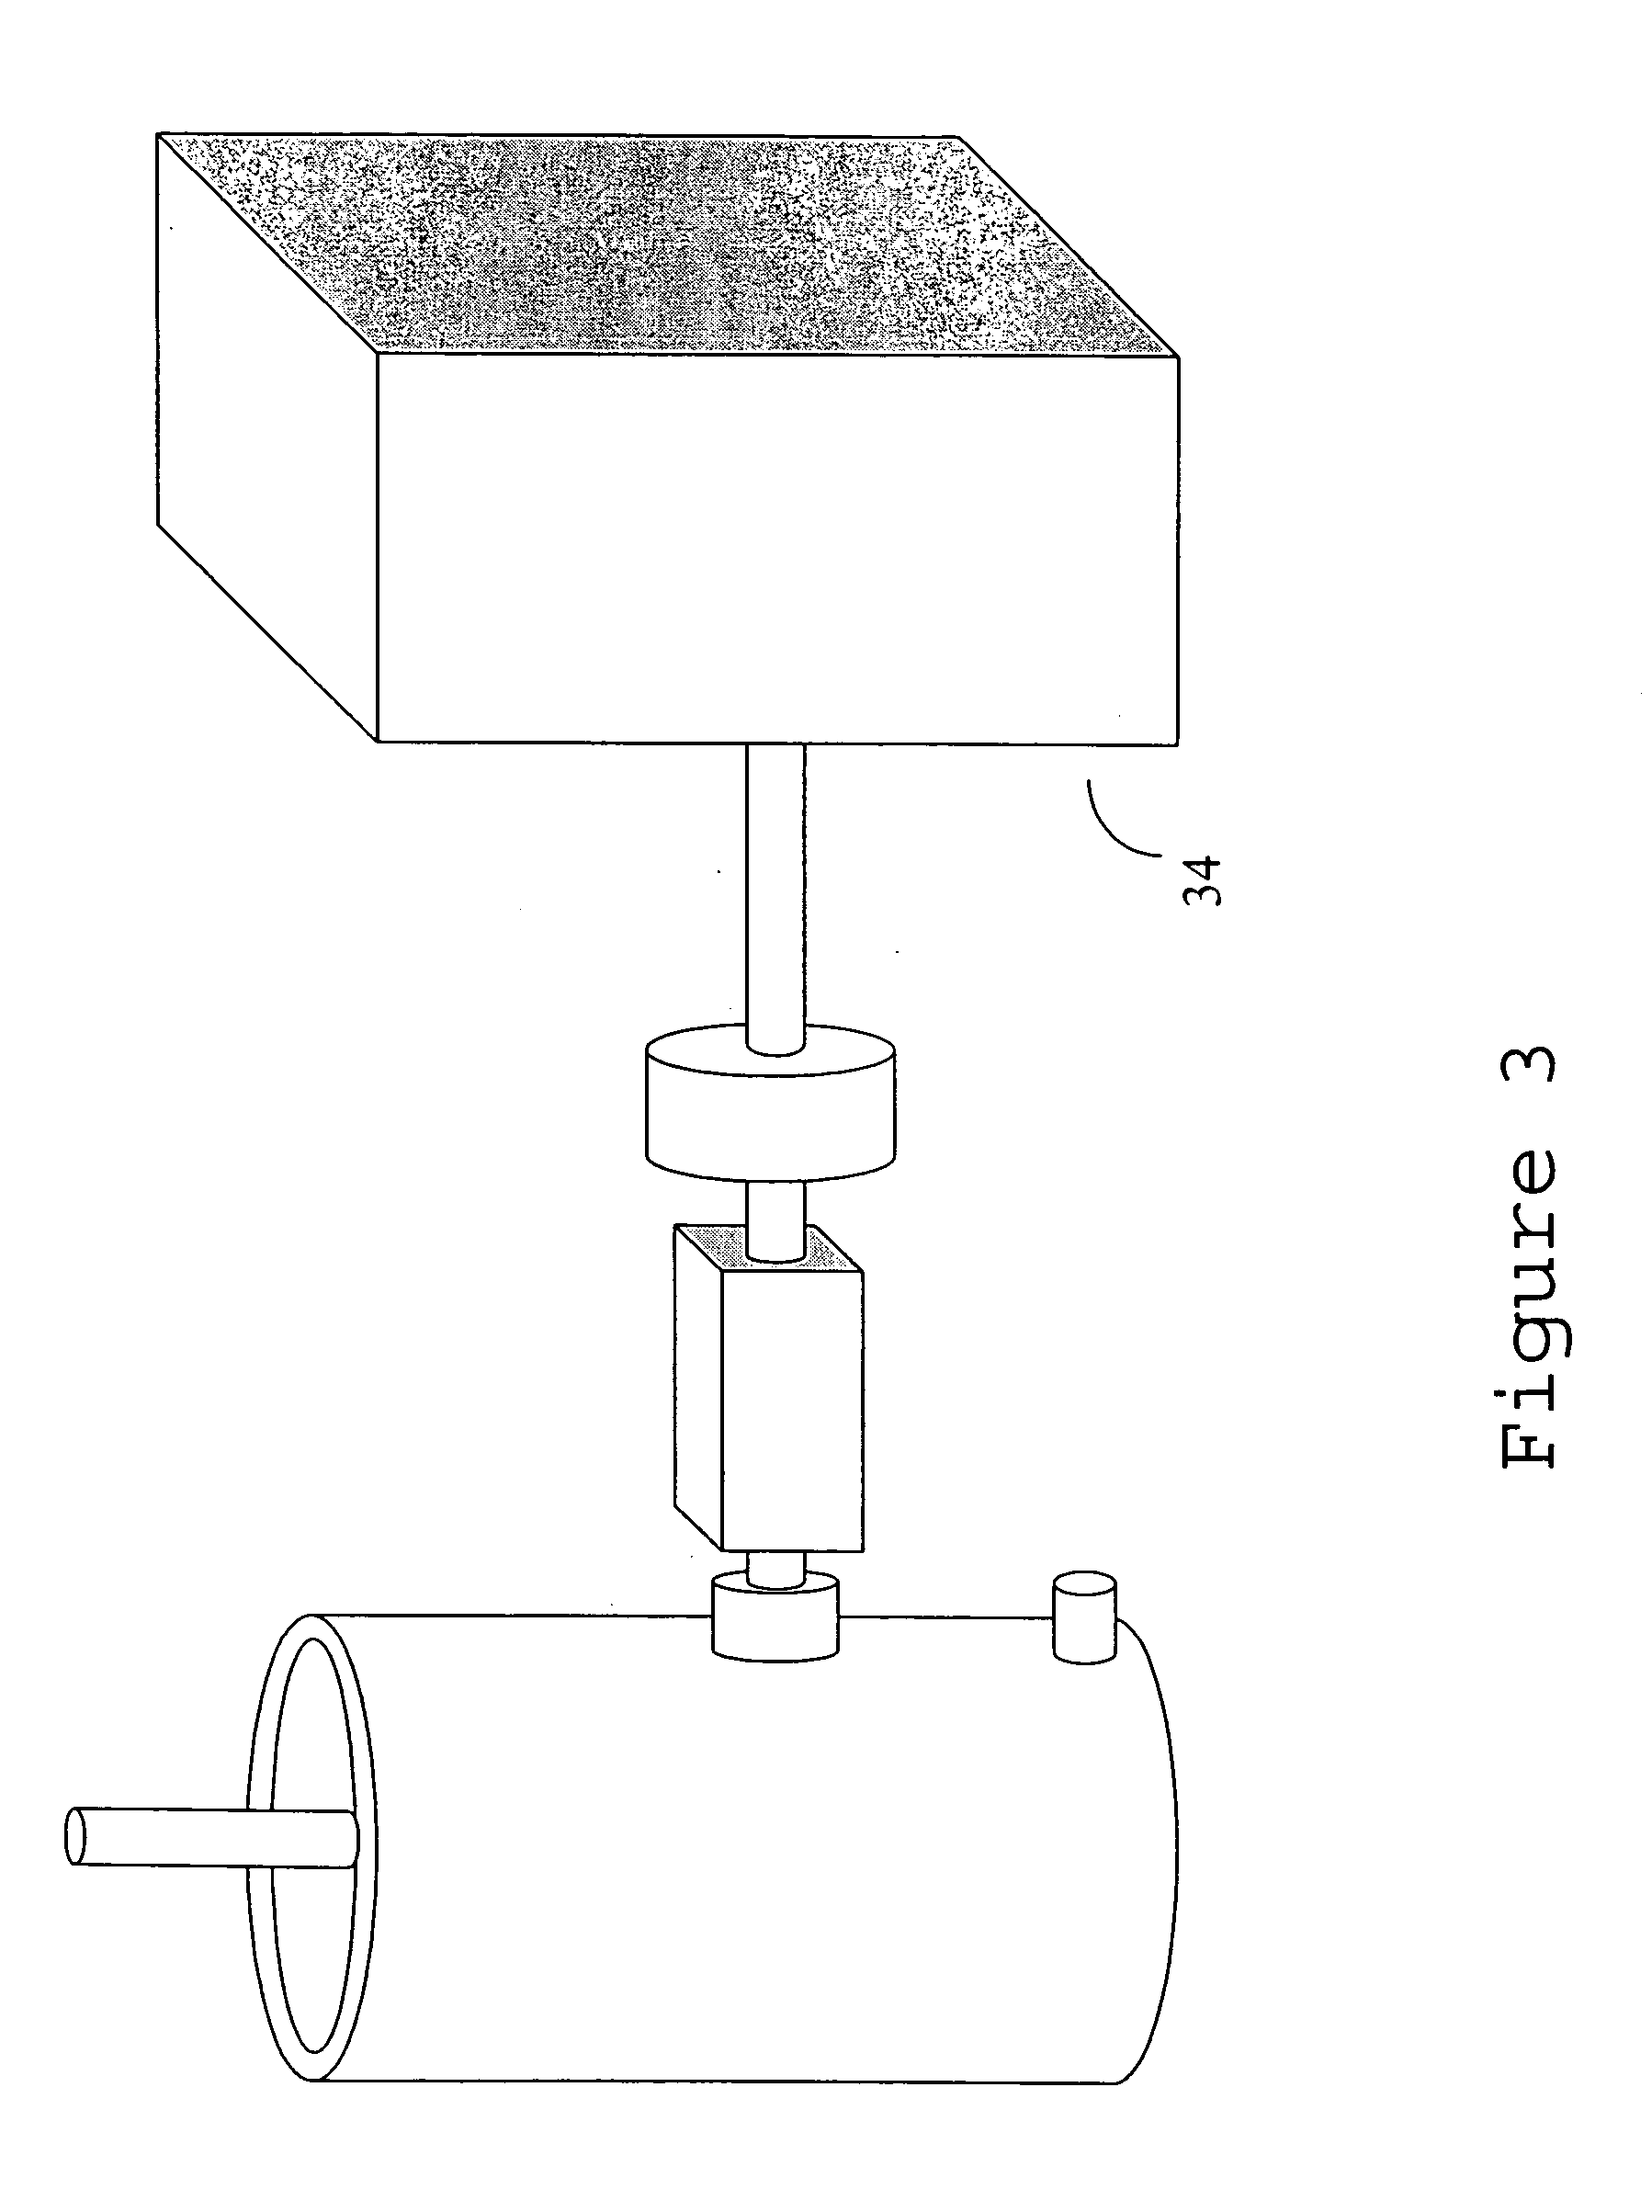 System and method for manufacturing a clarified butter product